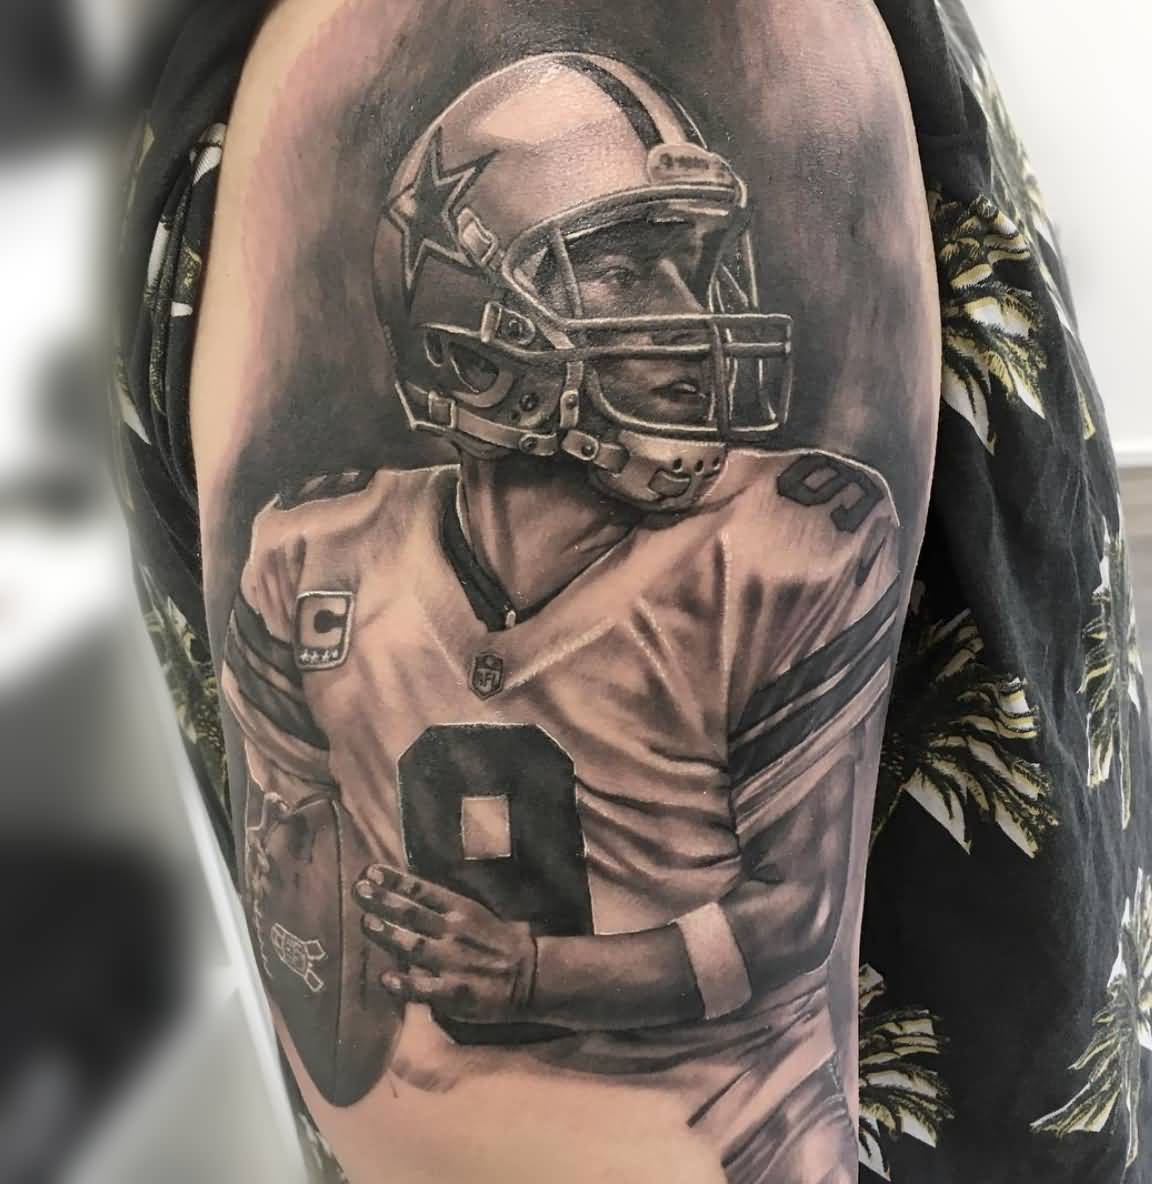 Amazing Black & White American football tattoo by Luis